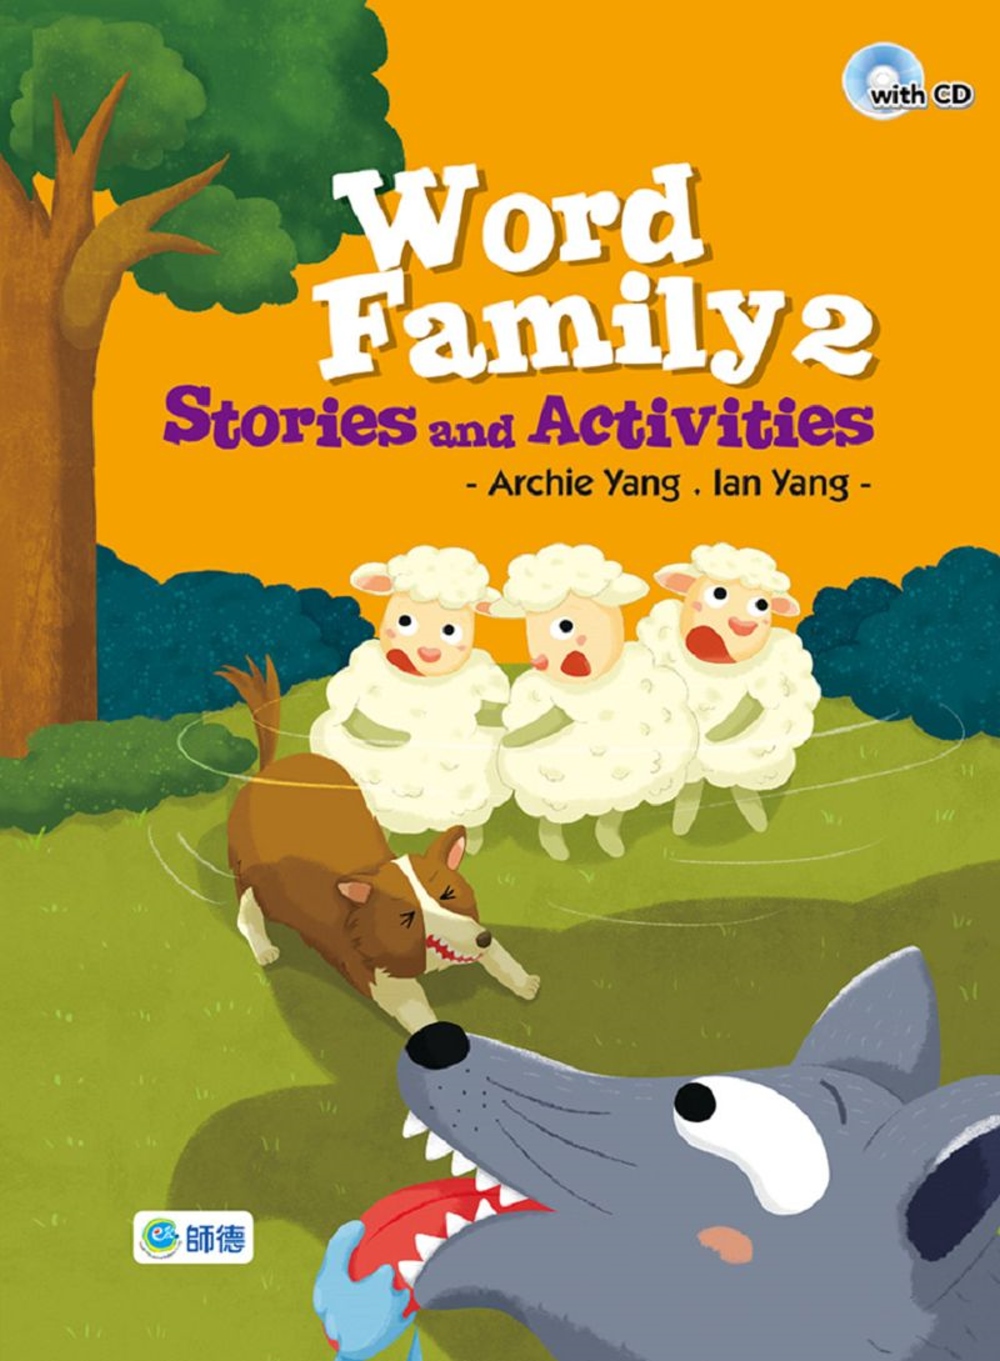 Word Family 2 Stories and Activities